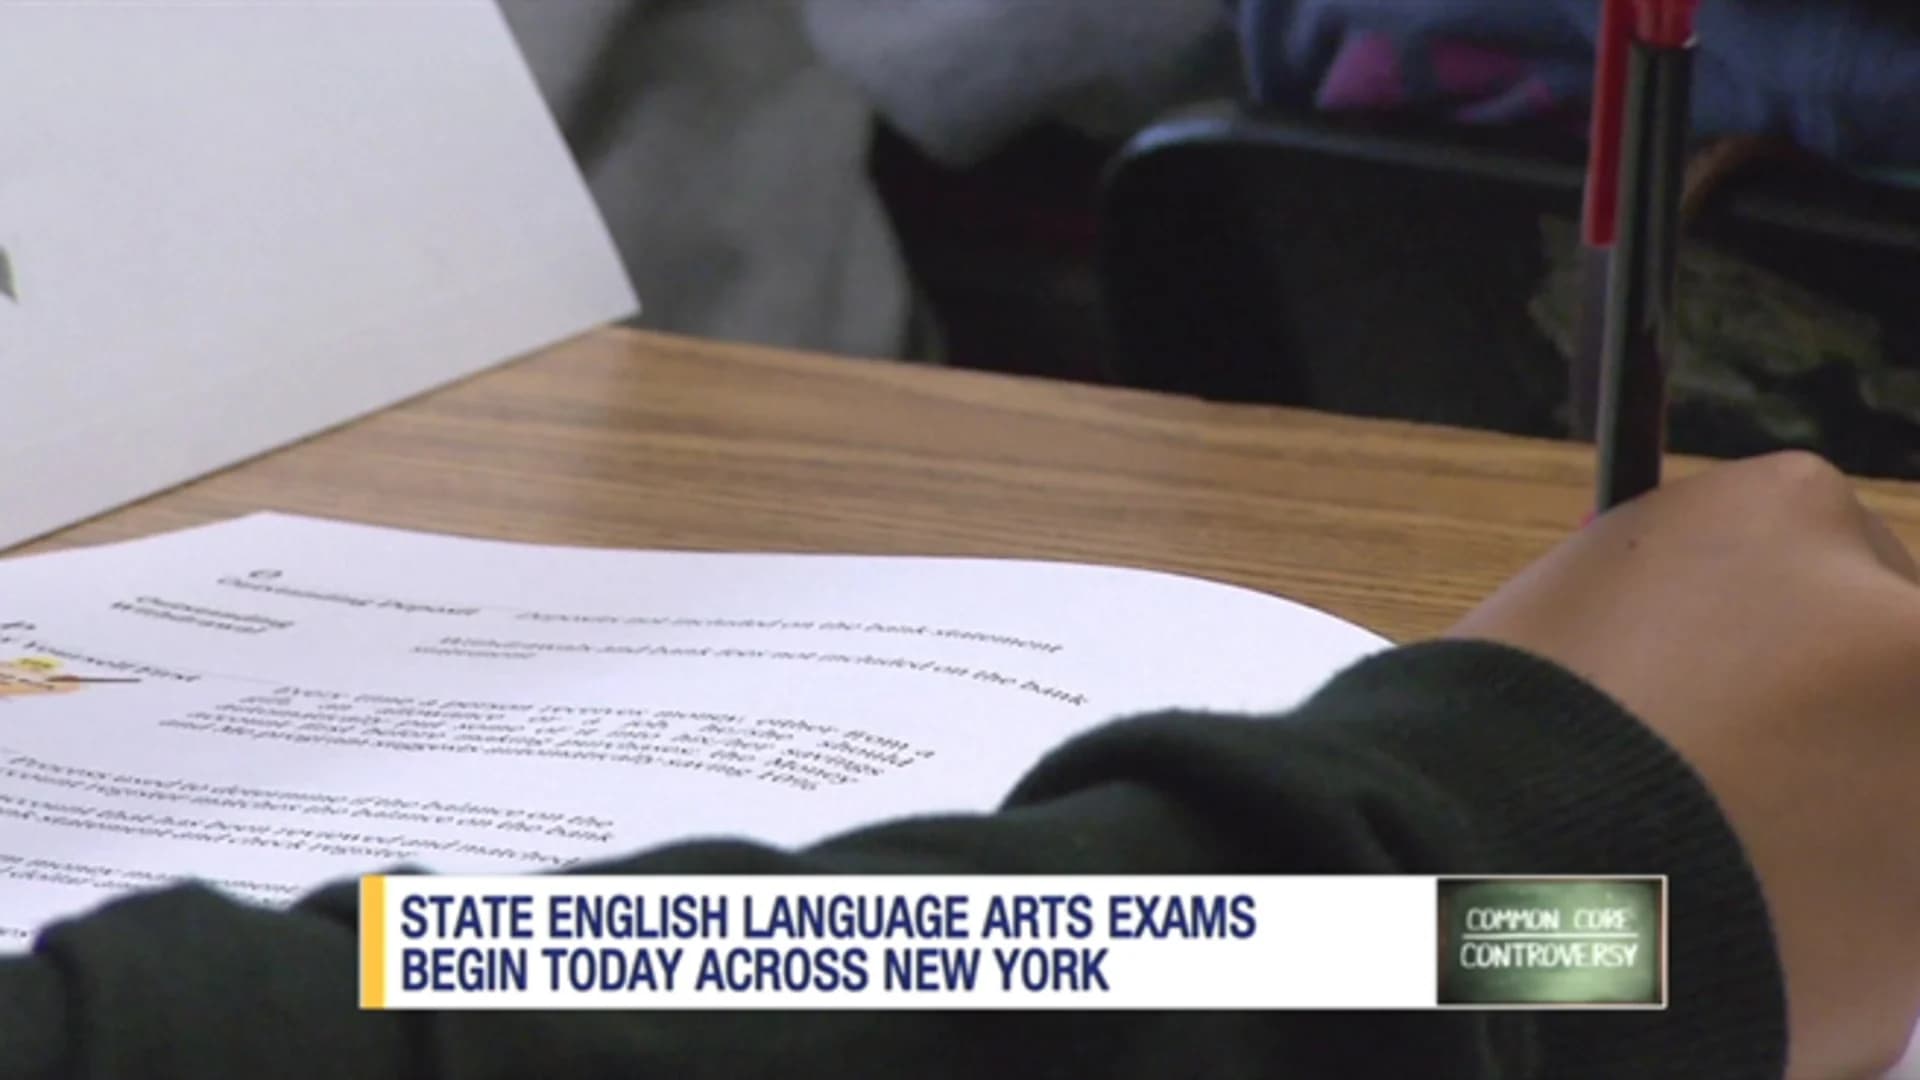 100,000 LI students expected to opt out of Common Core testing